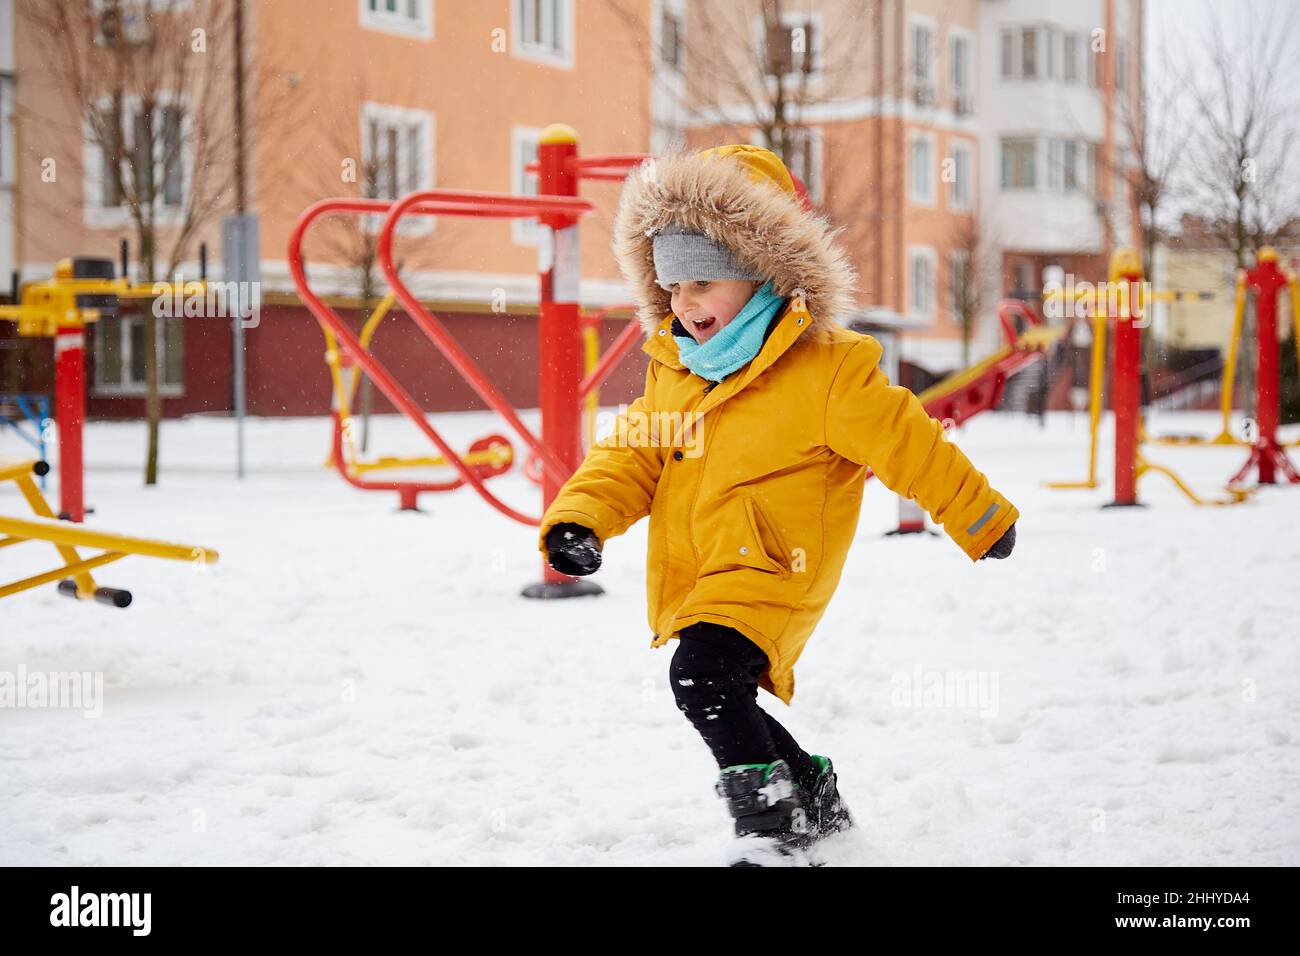 Happy smiling child having fun in the snow in the city. Winter fun outside. Boy in bright orange winter Jacket. Happy childhood. Winter season. High quality photo Stock Photo